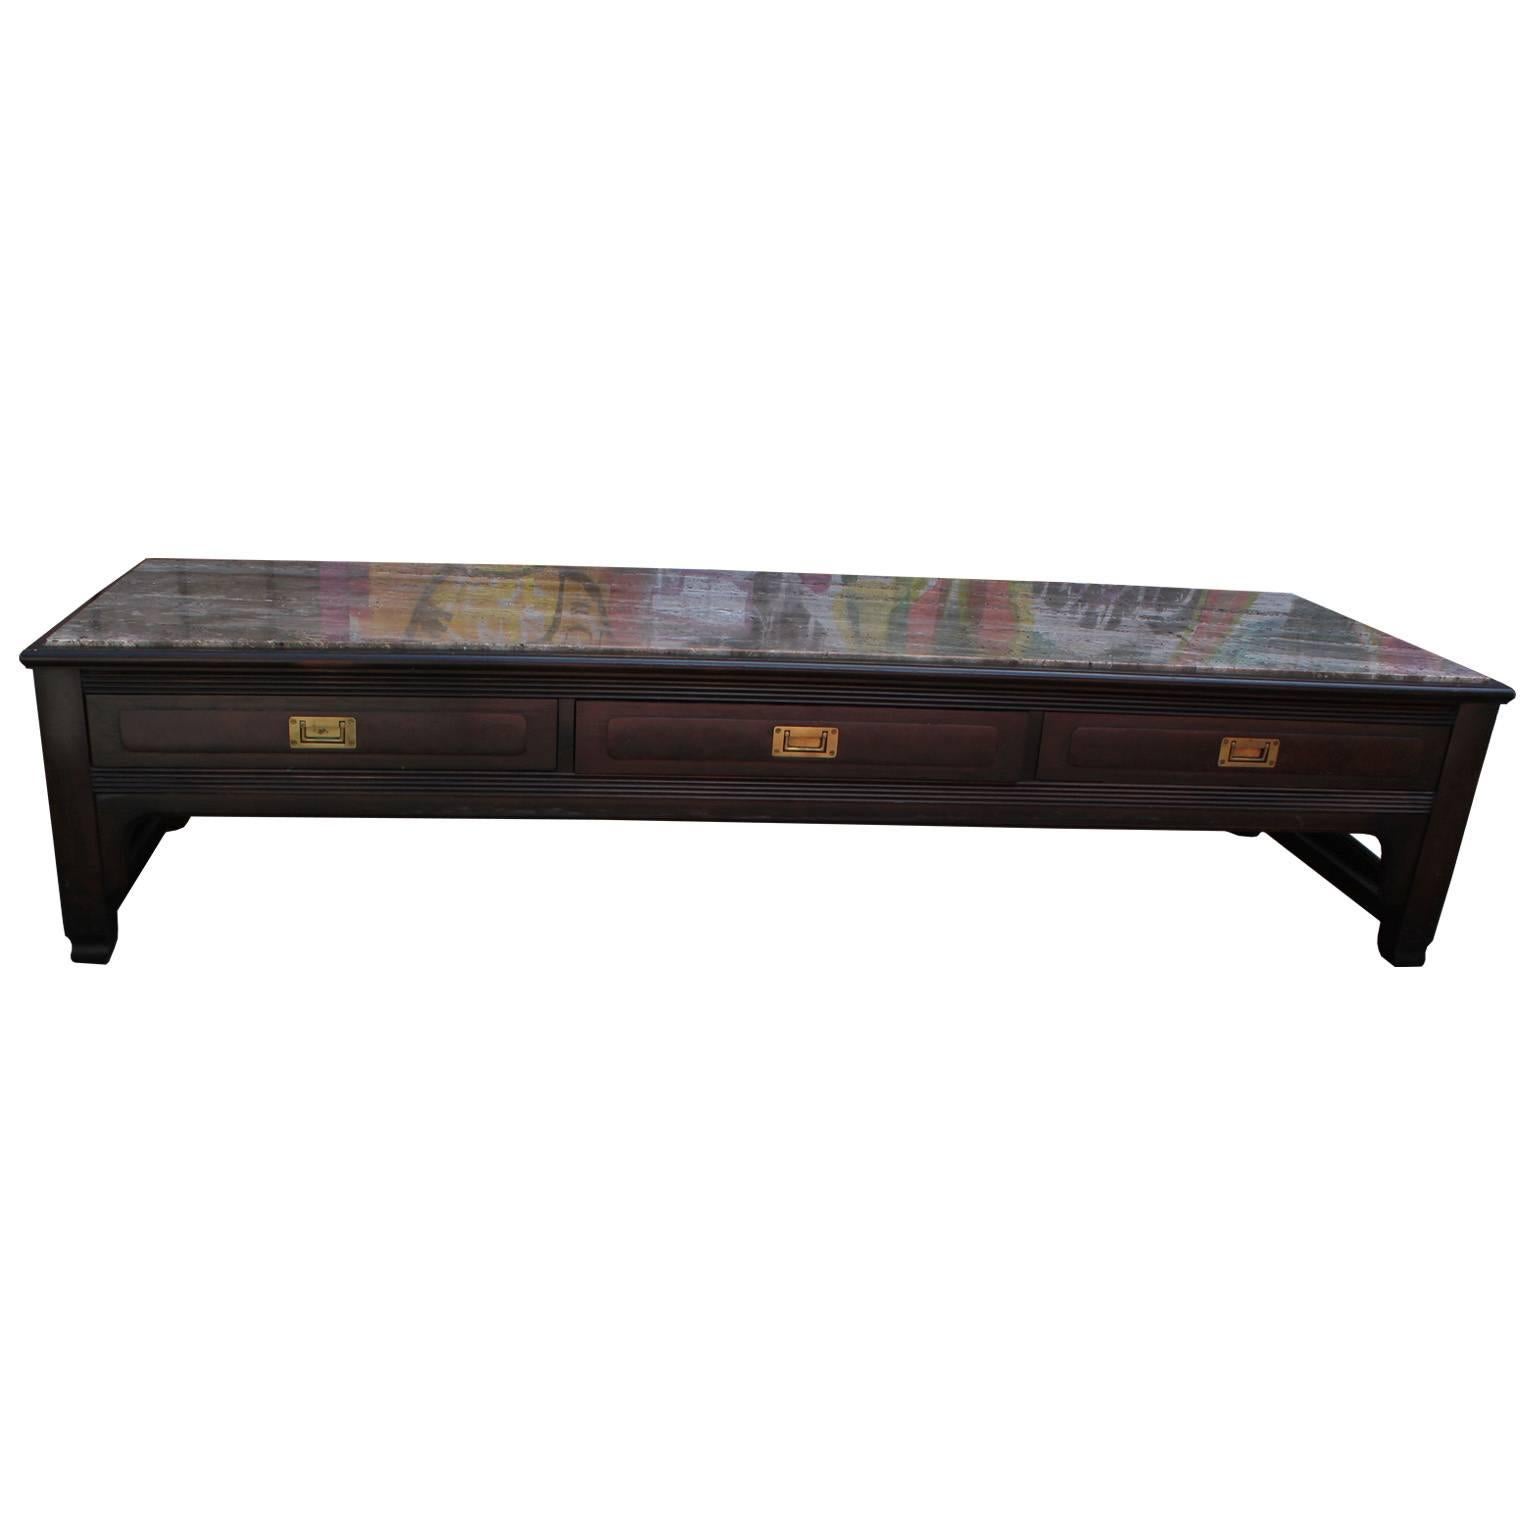 Elegant coffee table by Widdicomb. Dark walnut base has a wonderful attention to detail. Three drawers outfitted with brass Campaign Style hardware provide storage. Marble tabletop has excellent graining.